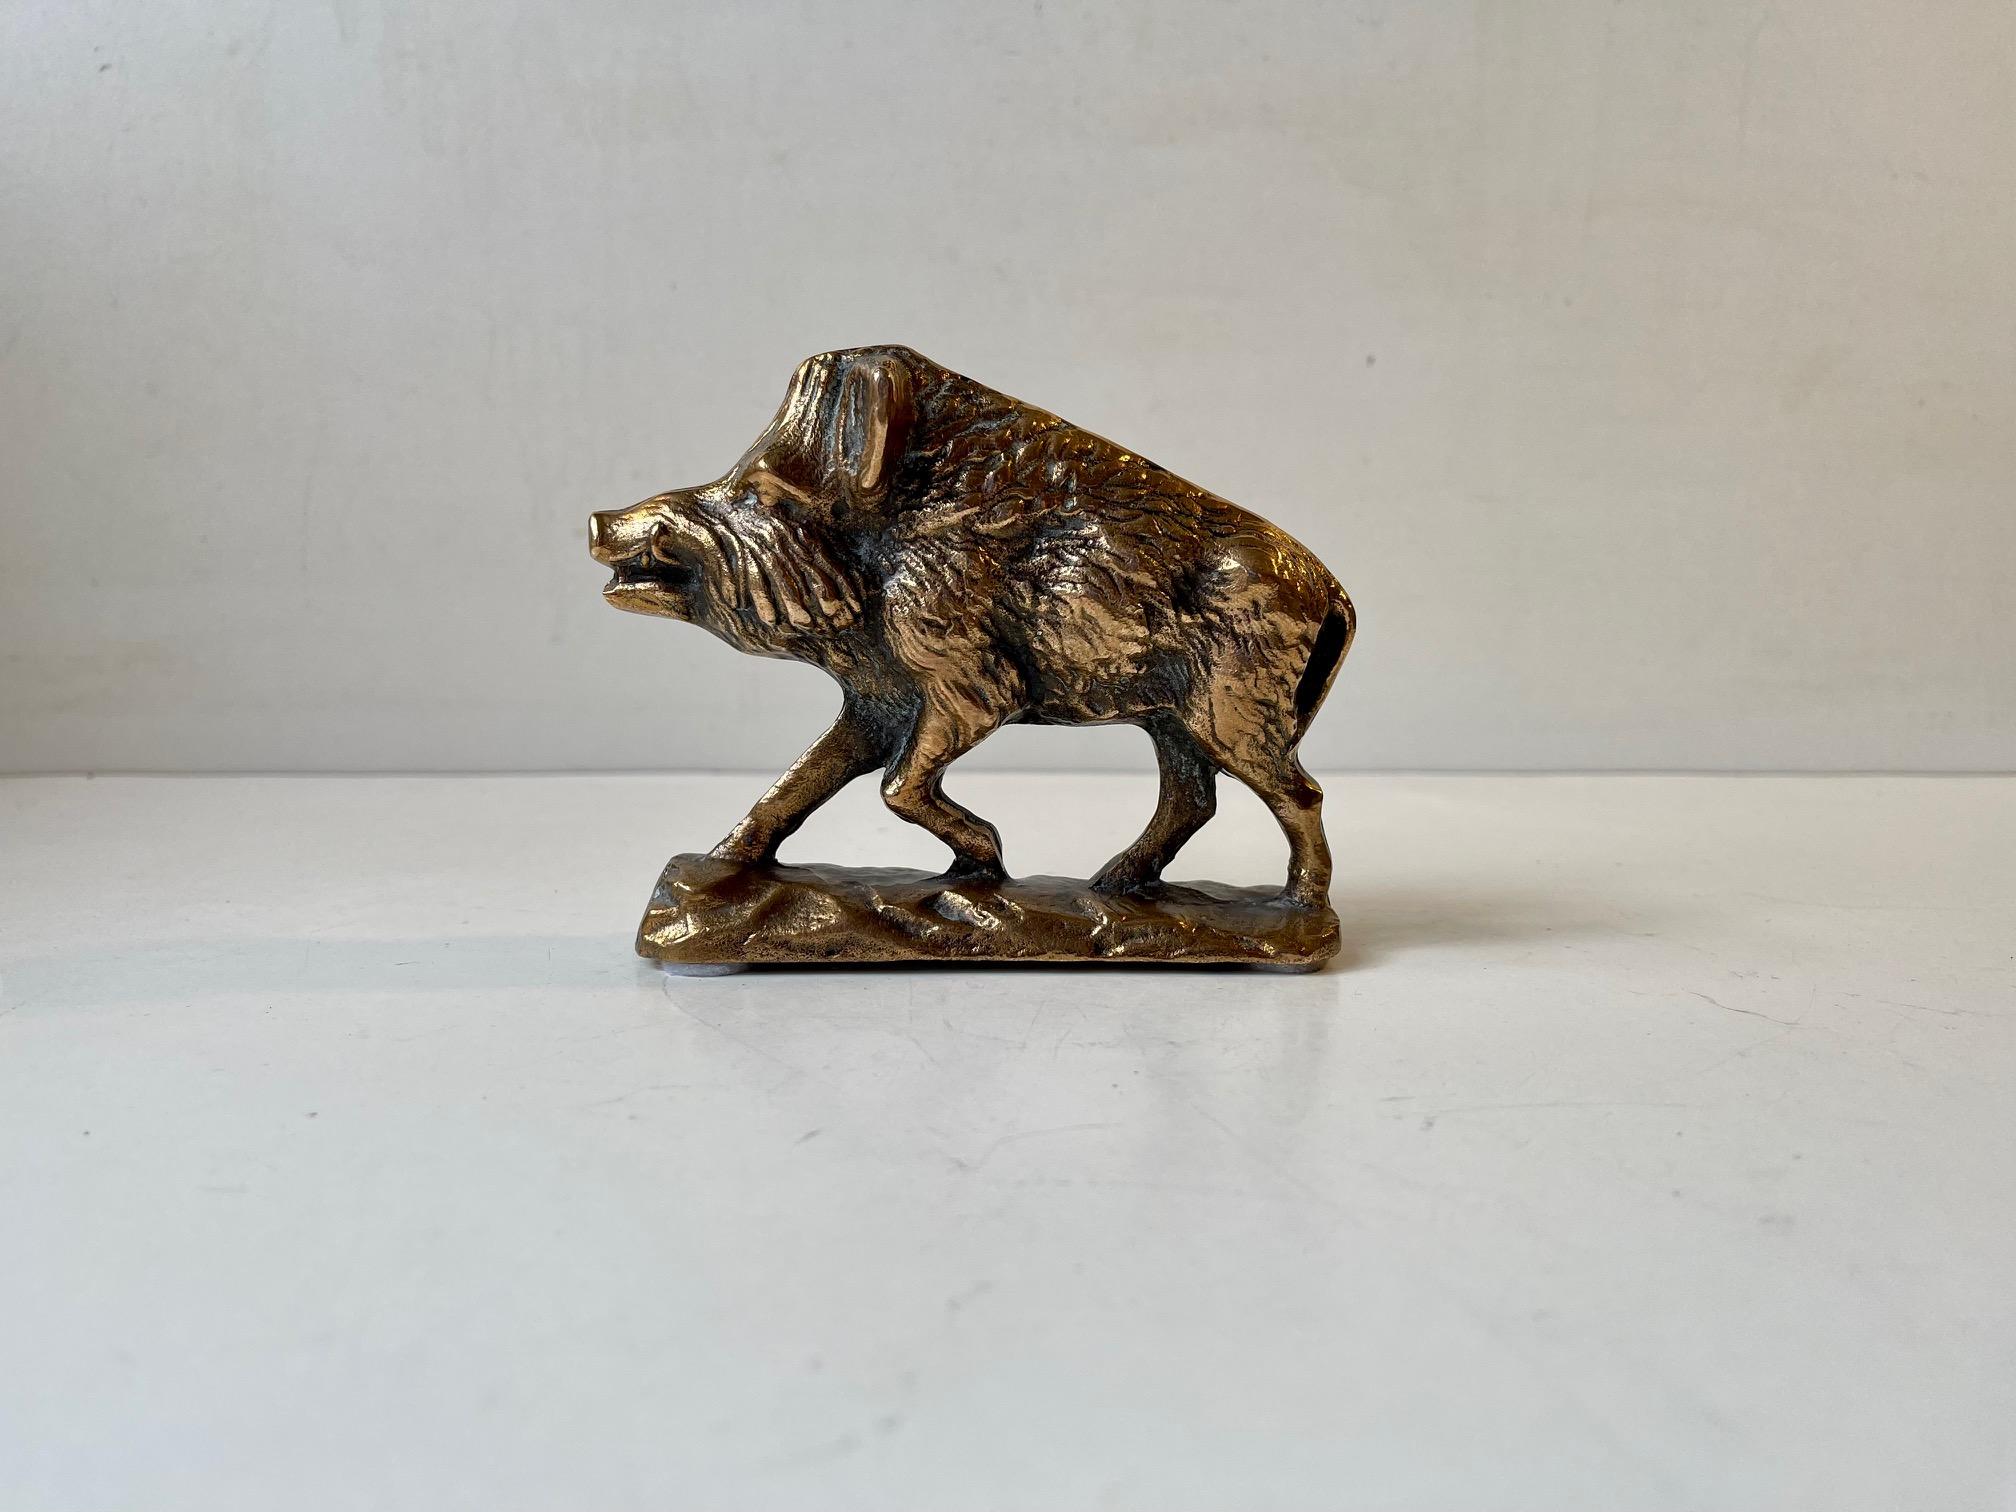 Small desk og mantle bronze depicting a young wild boar standing on a log. Fine detailing and a rich golden patina. Signed/marked France to its base. Where it was made circa 1920-25. Measurements: height: 10 cm, wide/length: 12.5 cm, depth: 3.7 cm.